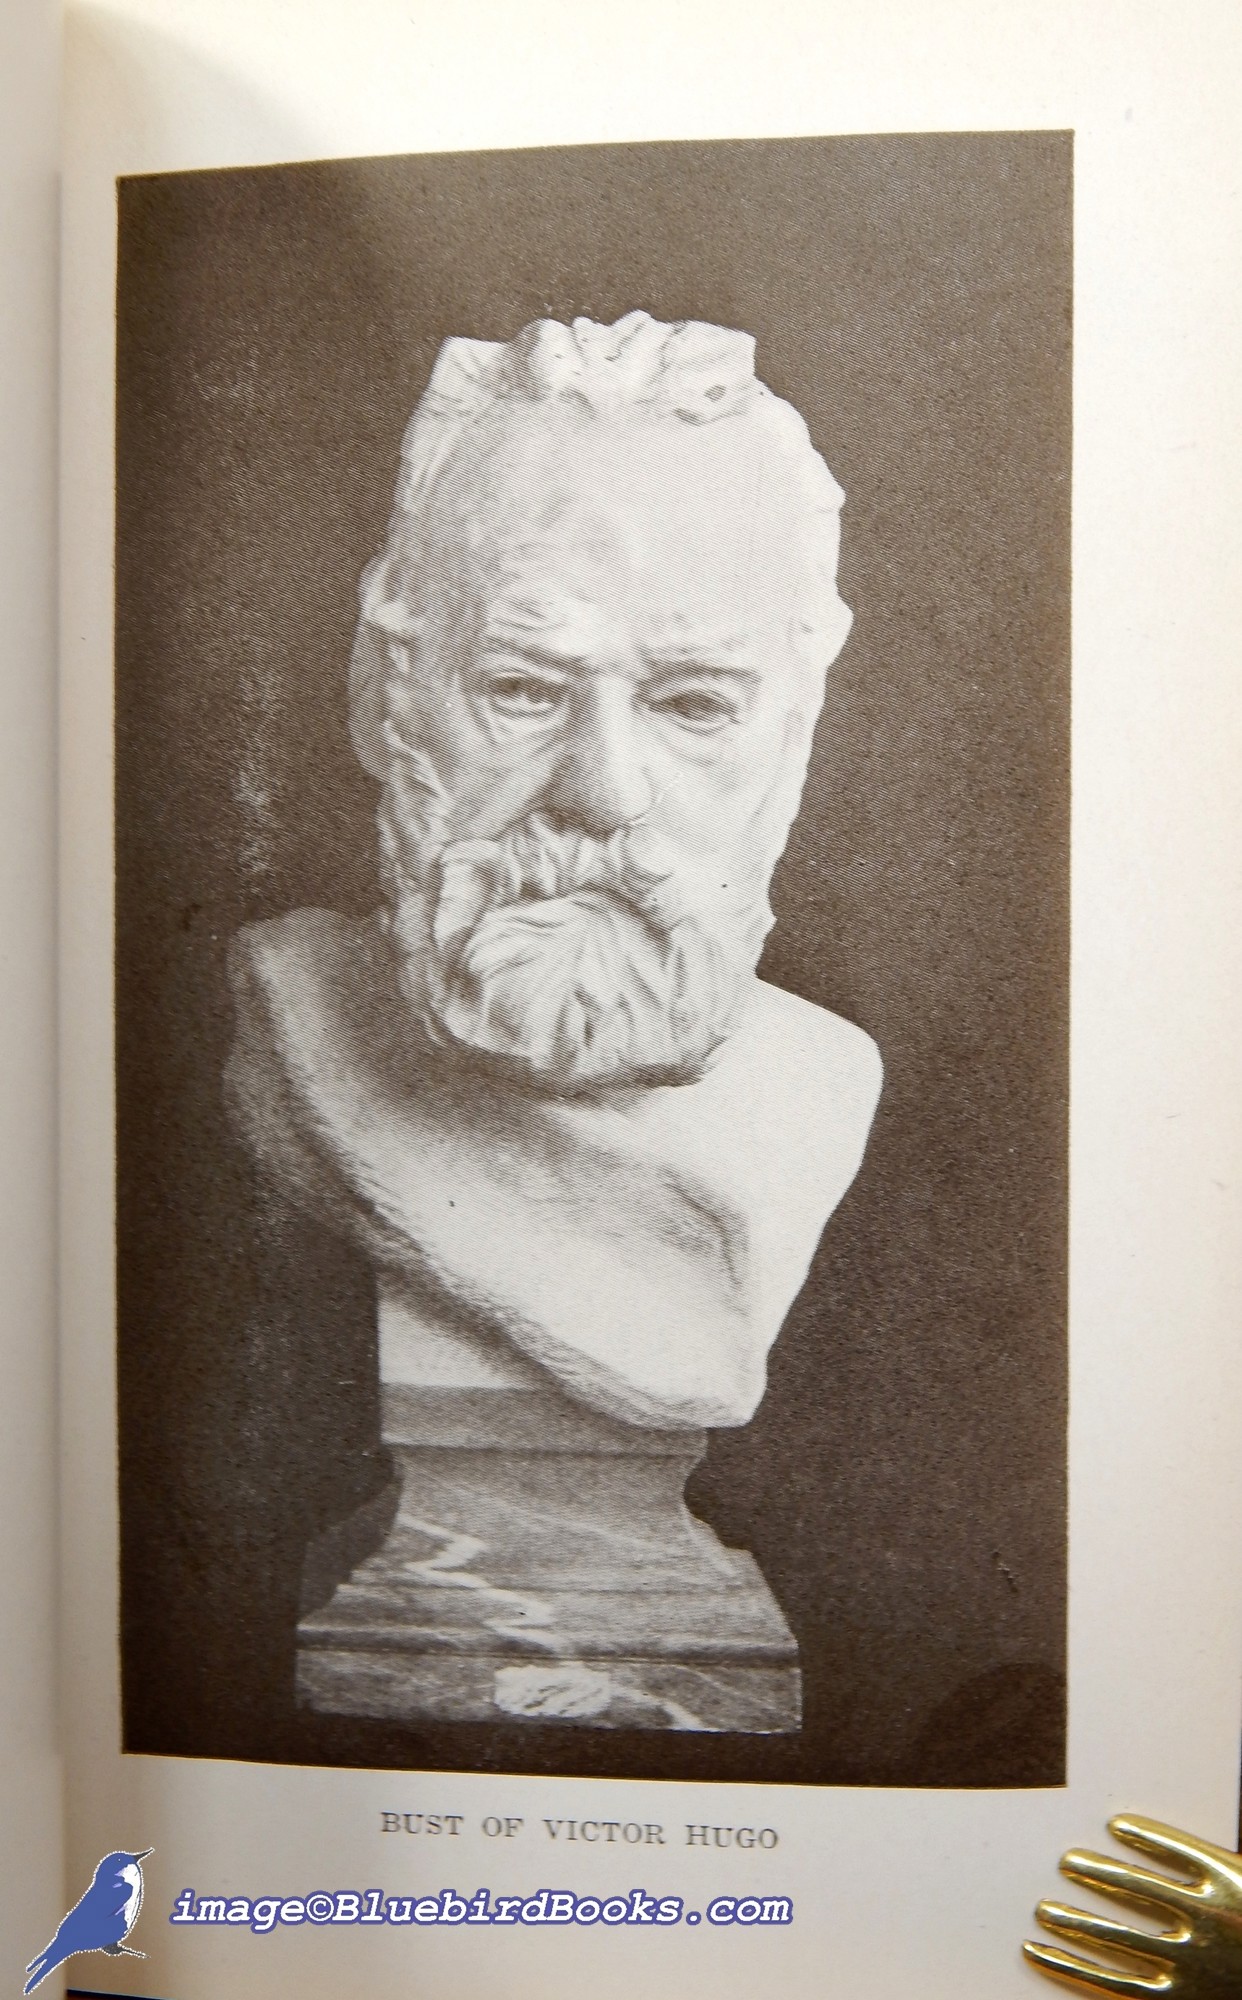 RODIN, AUGUSTE; WEINBERG, LOUIS - The Art of Rodin (Modern Library Spine 2, #41. 1)